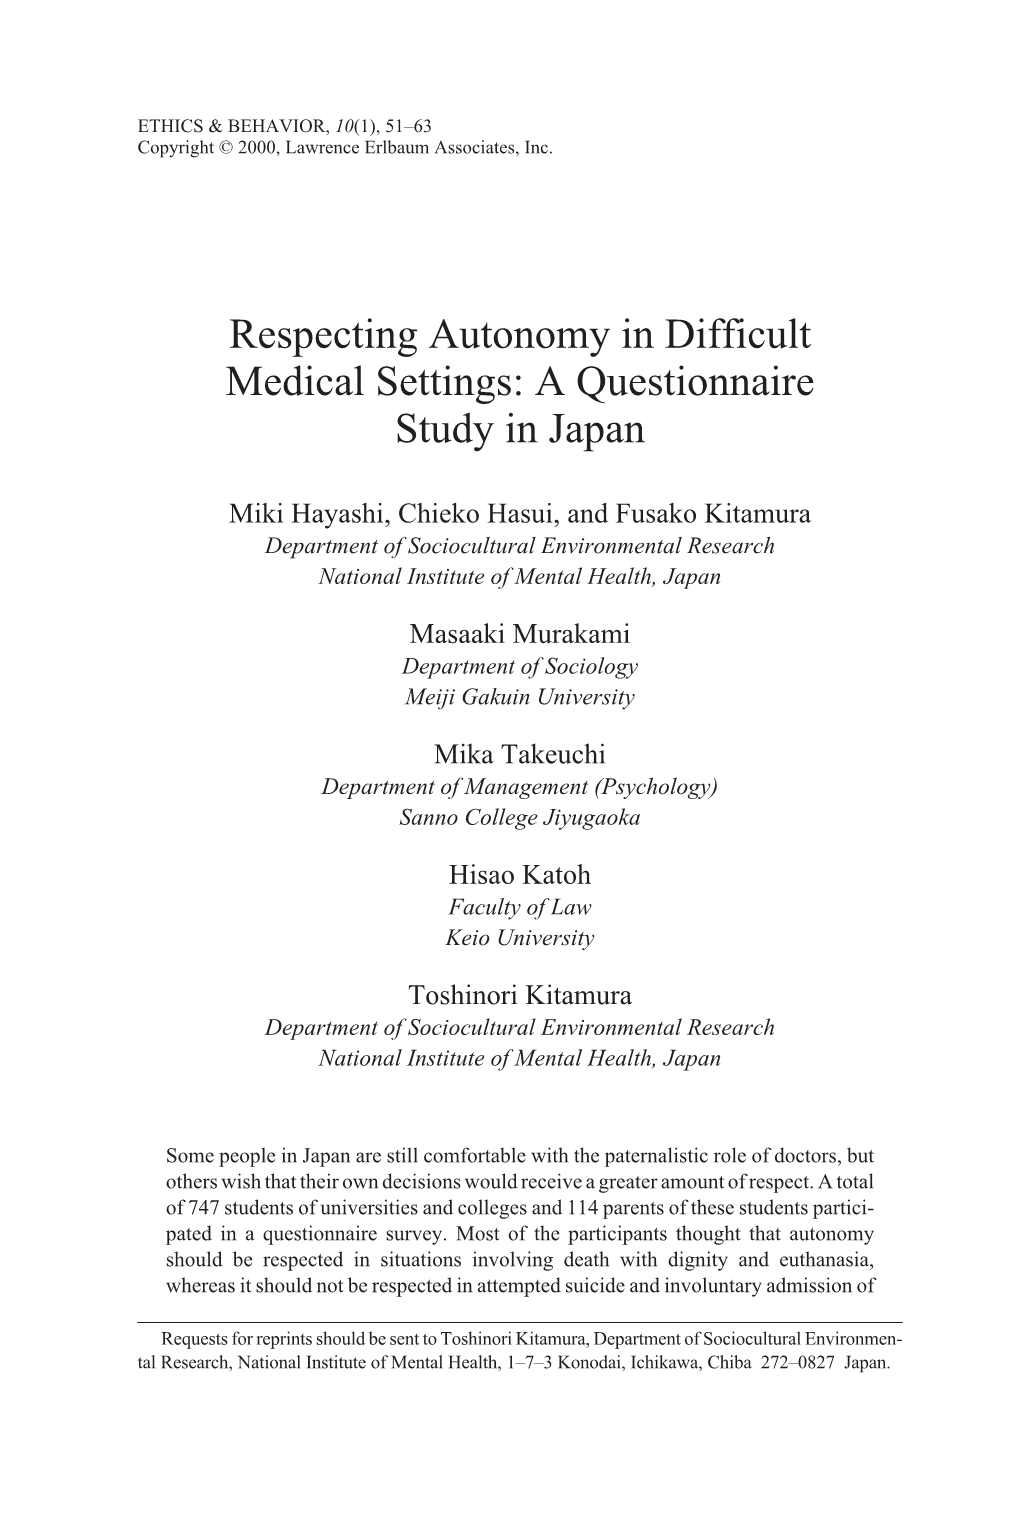 Respecting Autonomy in Difficult Medical Settings: a Questionnaire Study in Japan